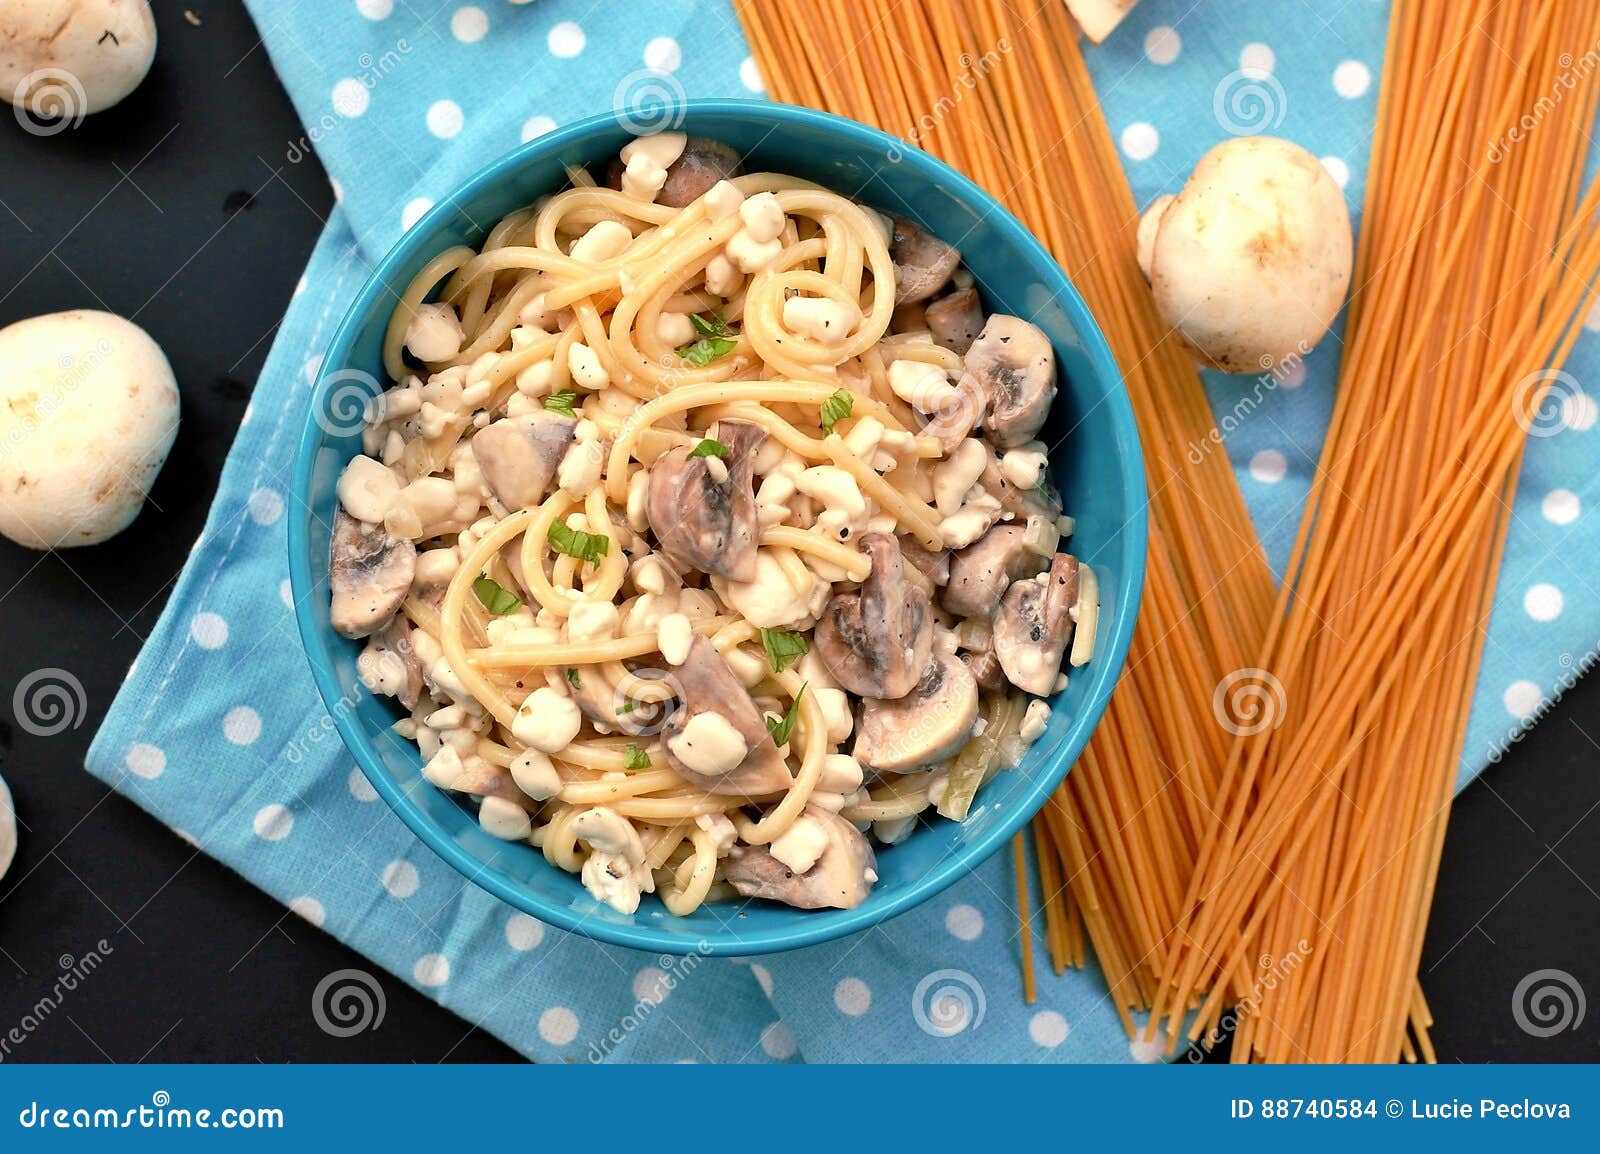 Meal From Pasta Spaghetti Mushroom Cottage Cheese And Parsley In